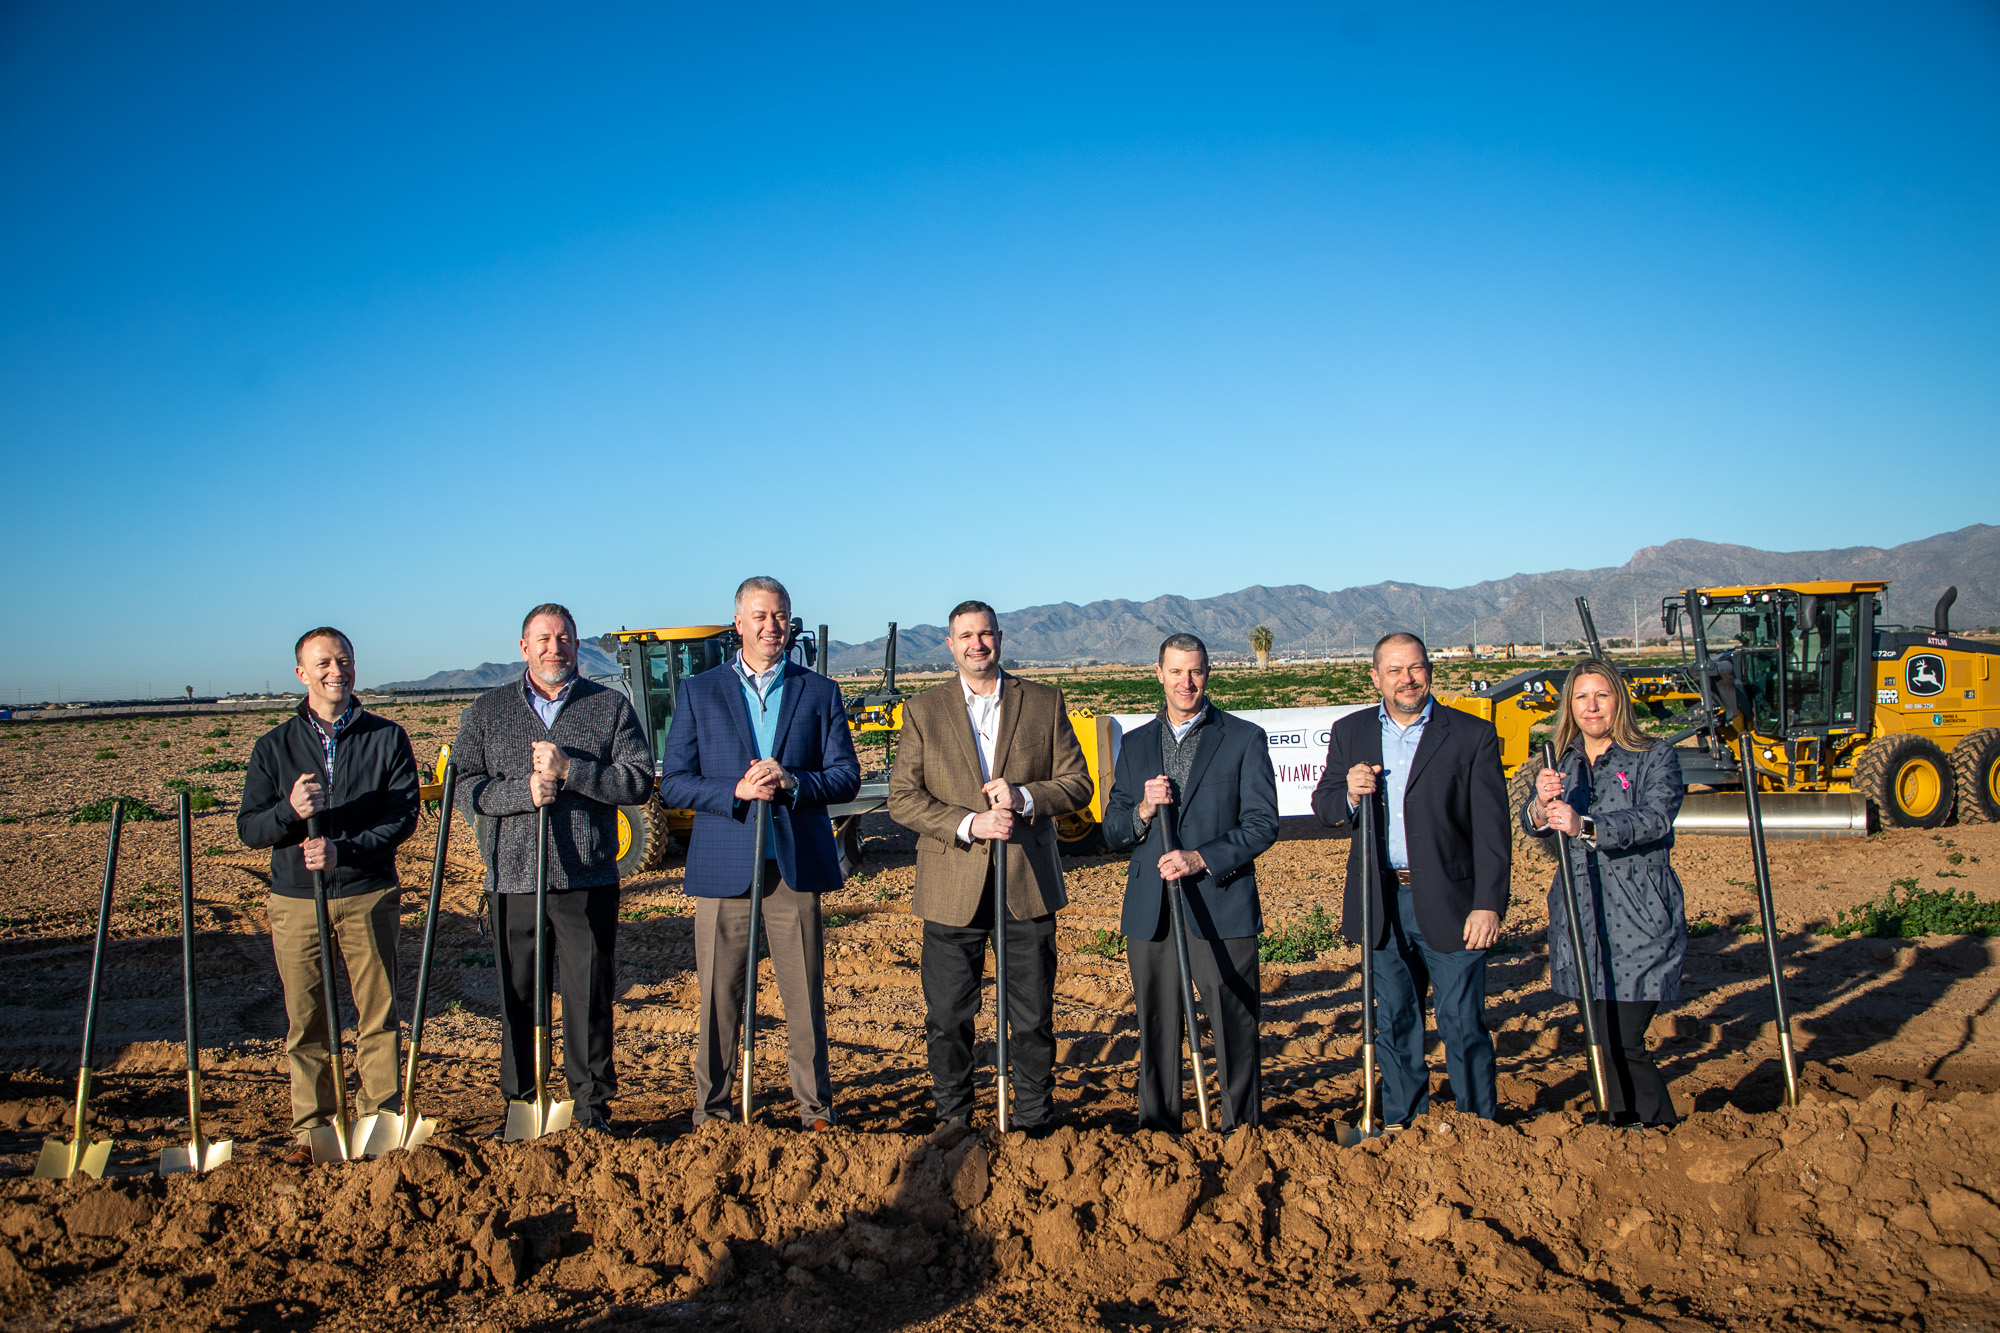 ViaWest and Willmeng Construction break ground on an industrial project in front of a dirt field.